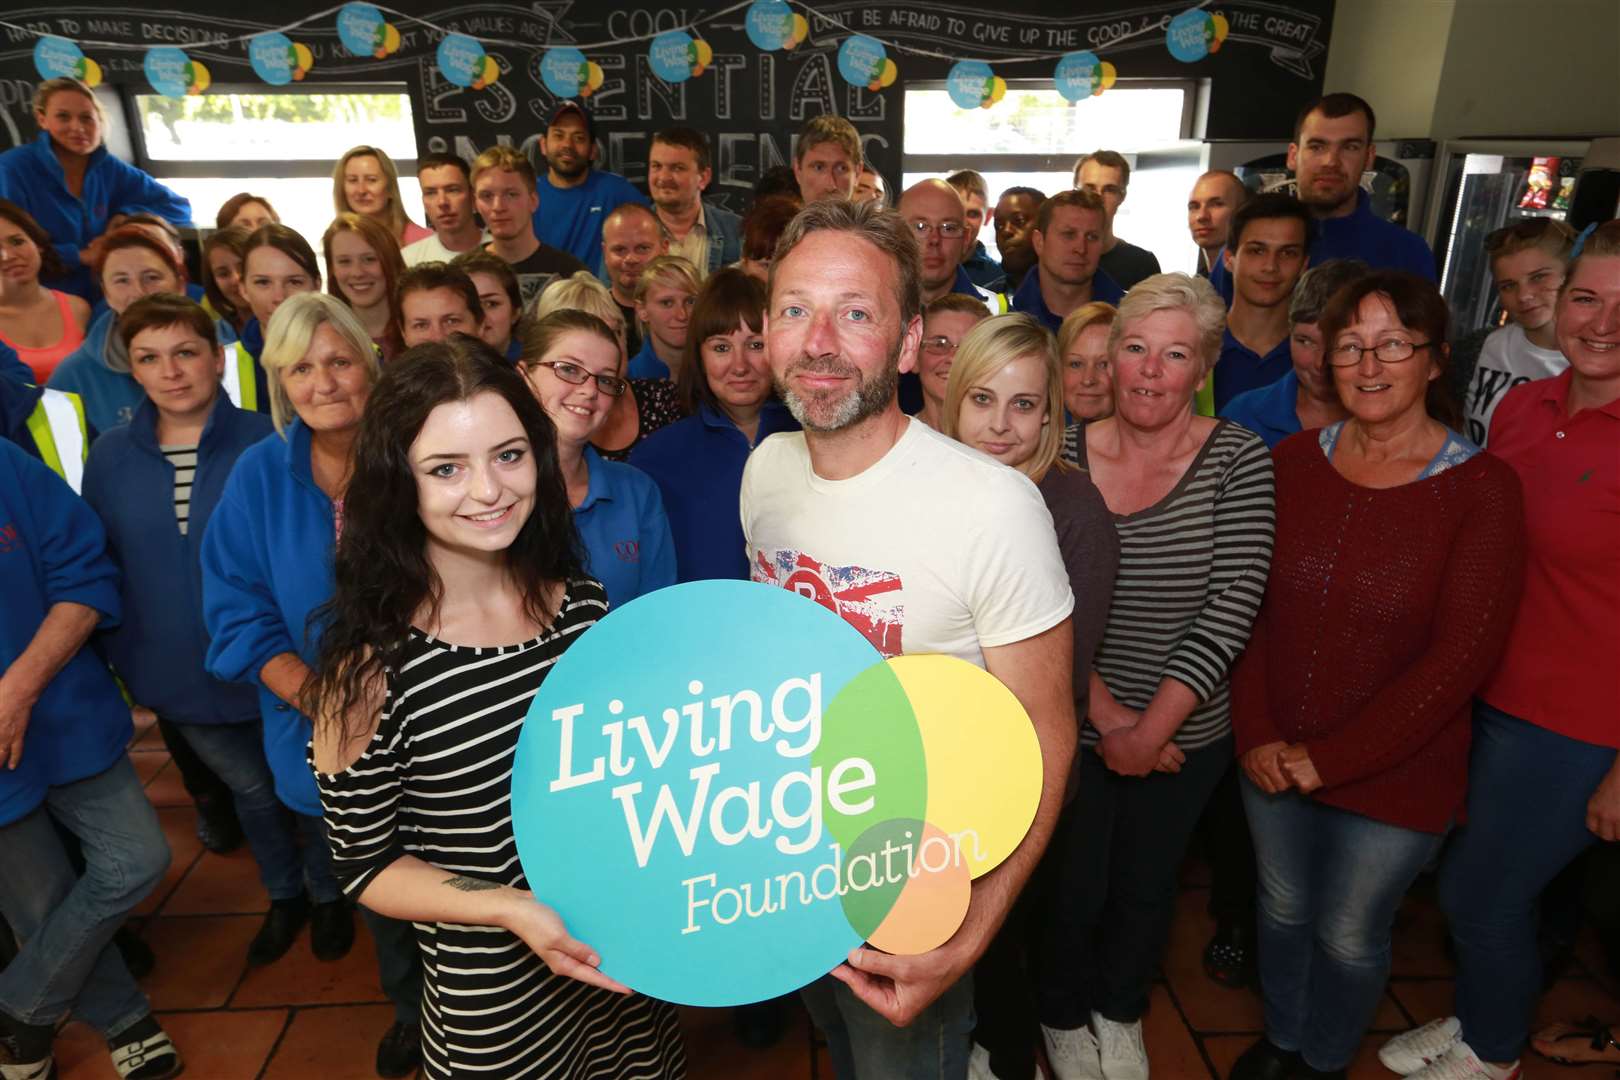 Cook founder Edward Perry receives his firm's accreditation from the Living Wage Foundation